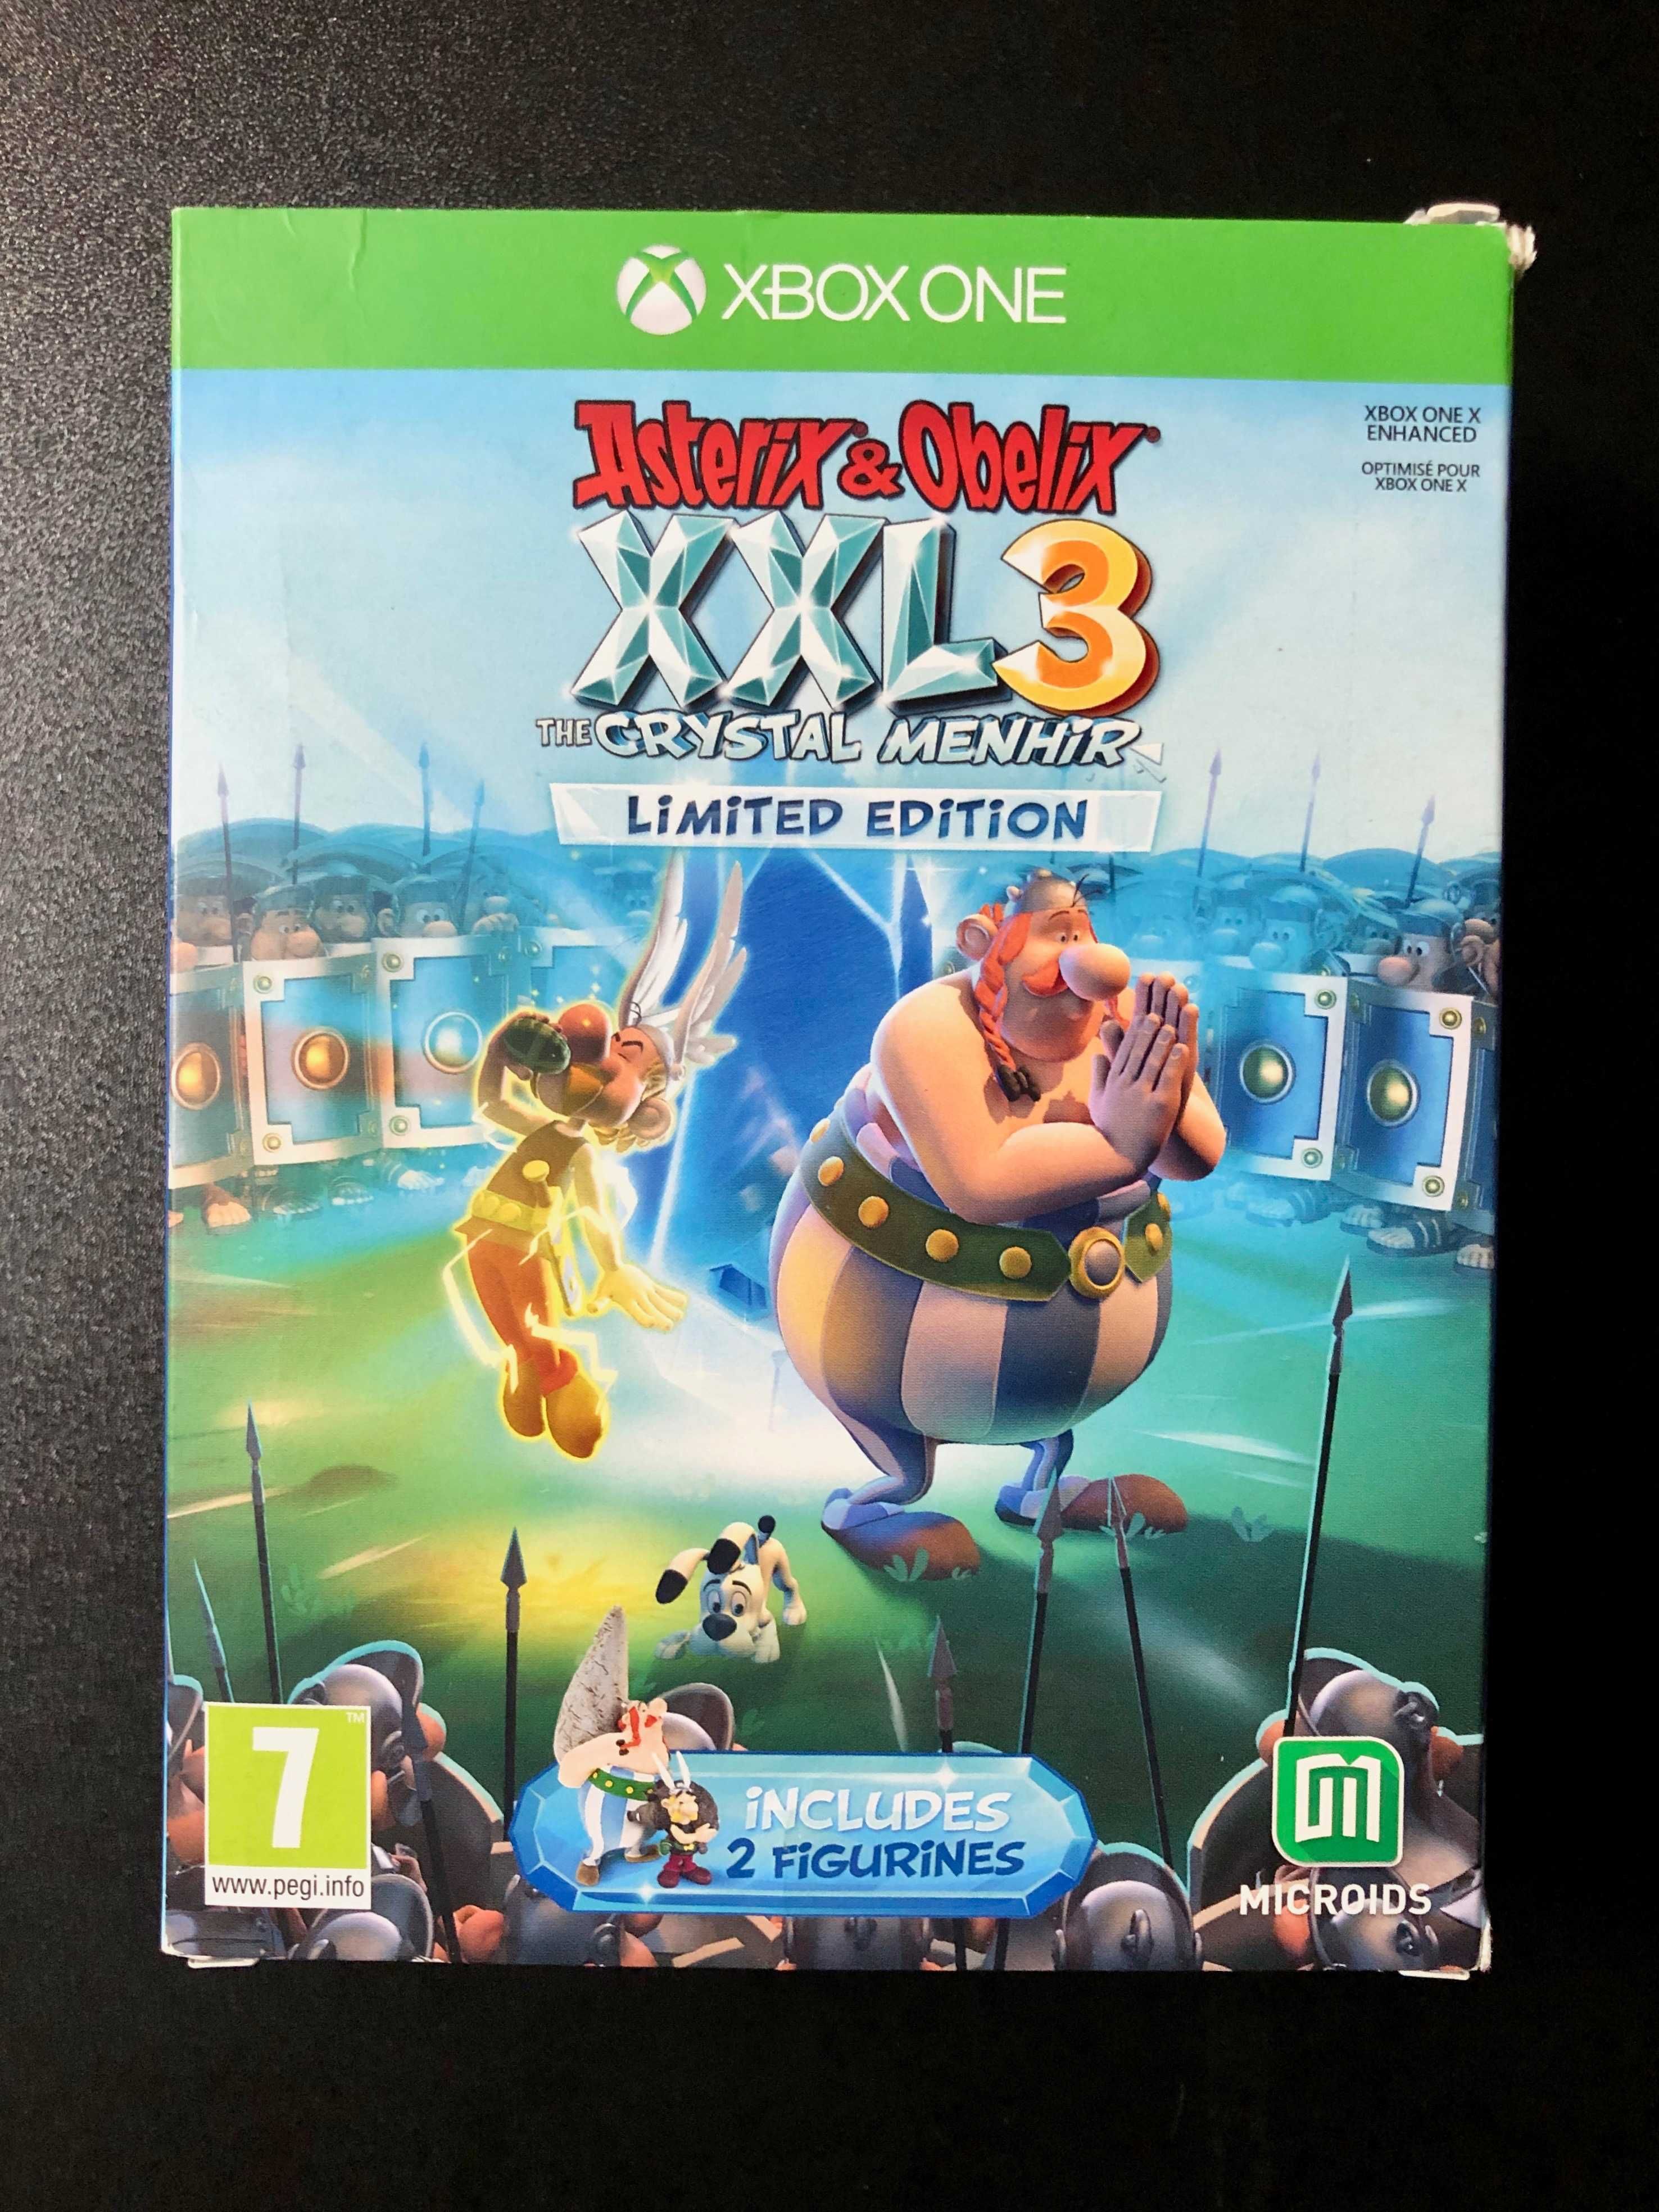 Asterix & Obelix XXL 3: The Crystal Menhir [Limited Edition] Xbox One